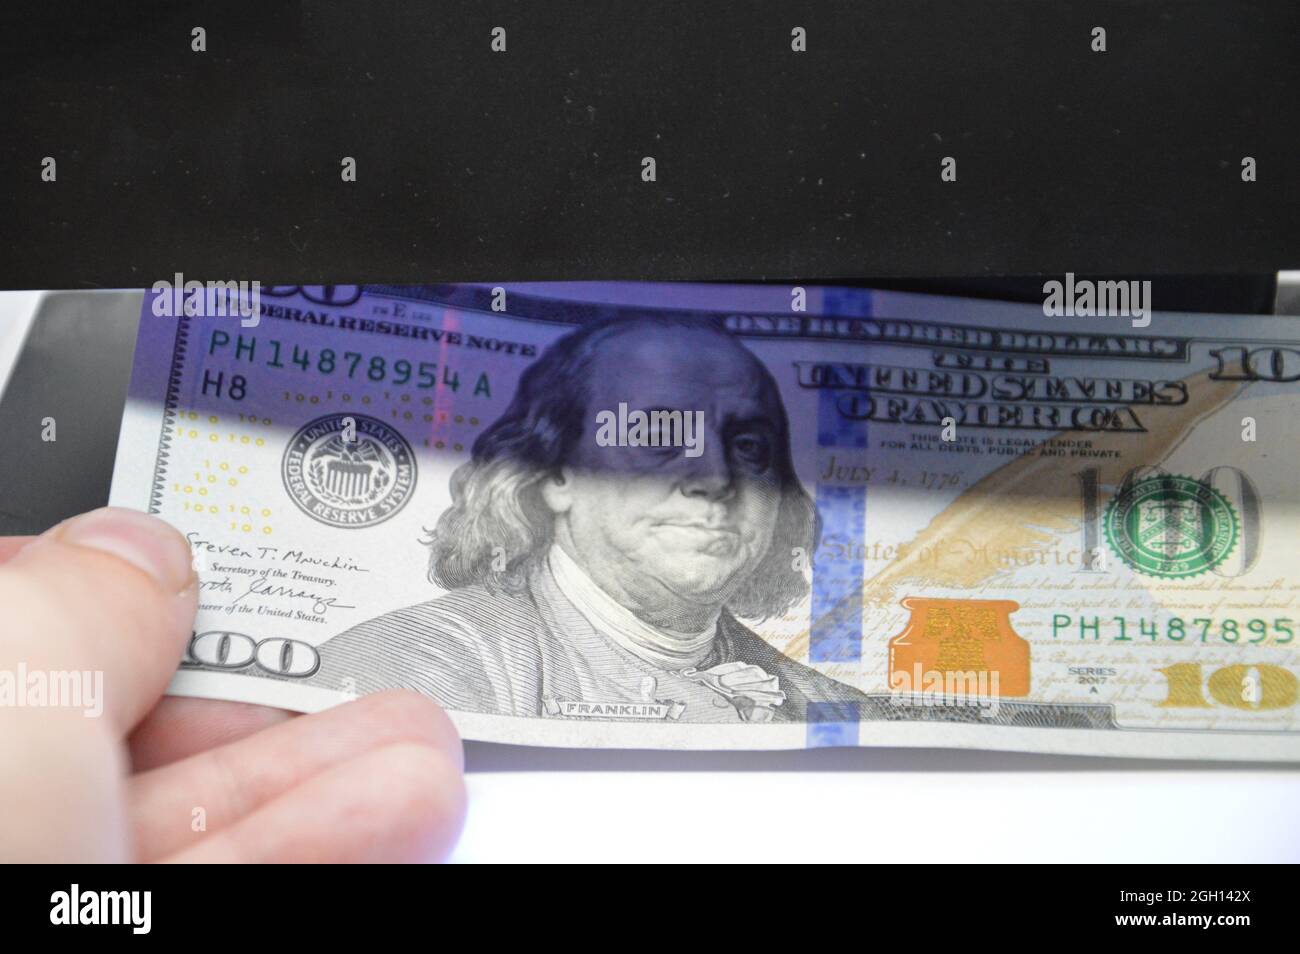 US dollars are checked for a authenticity. Stock Photo